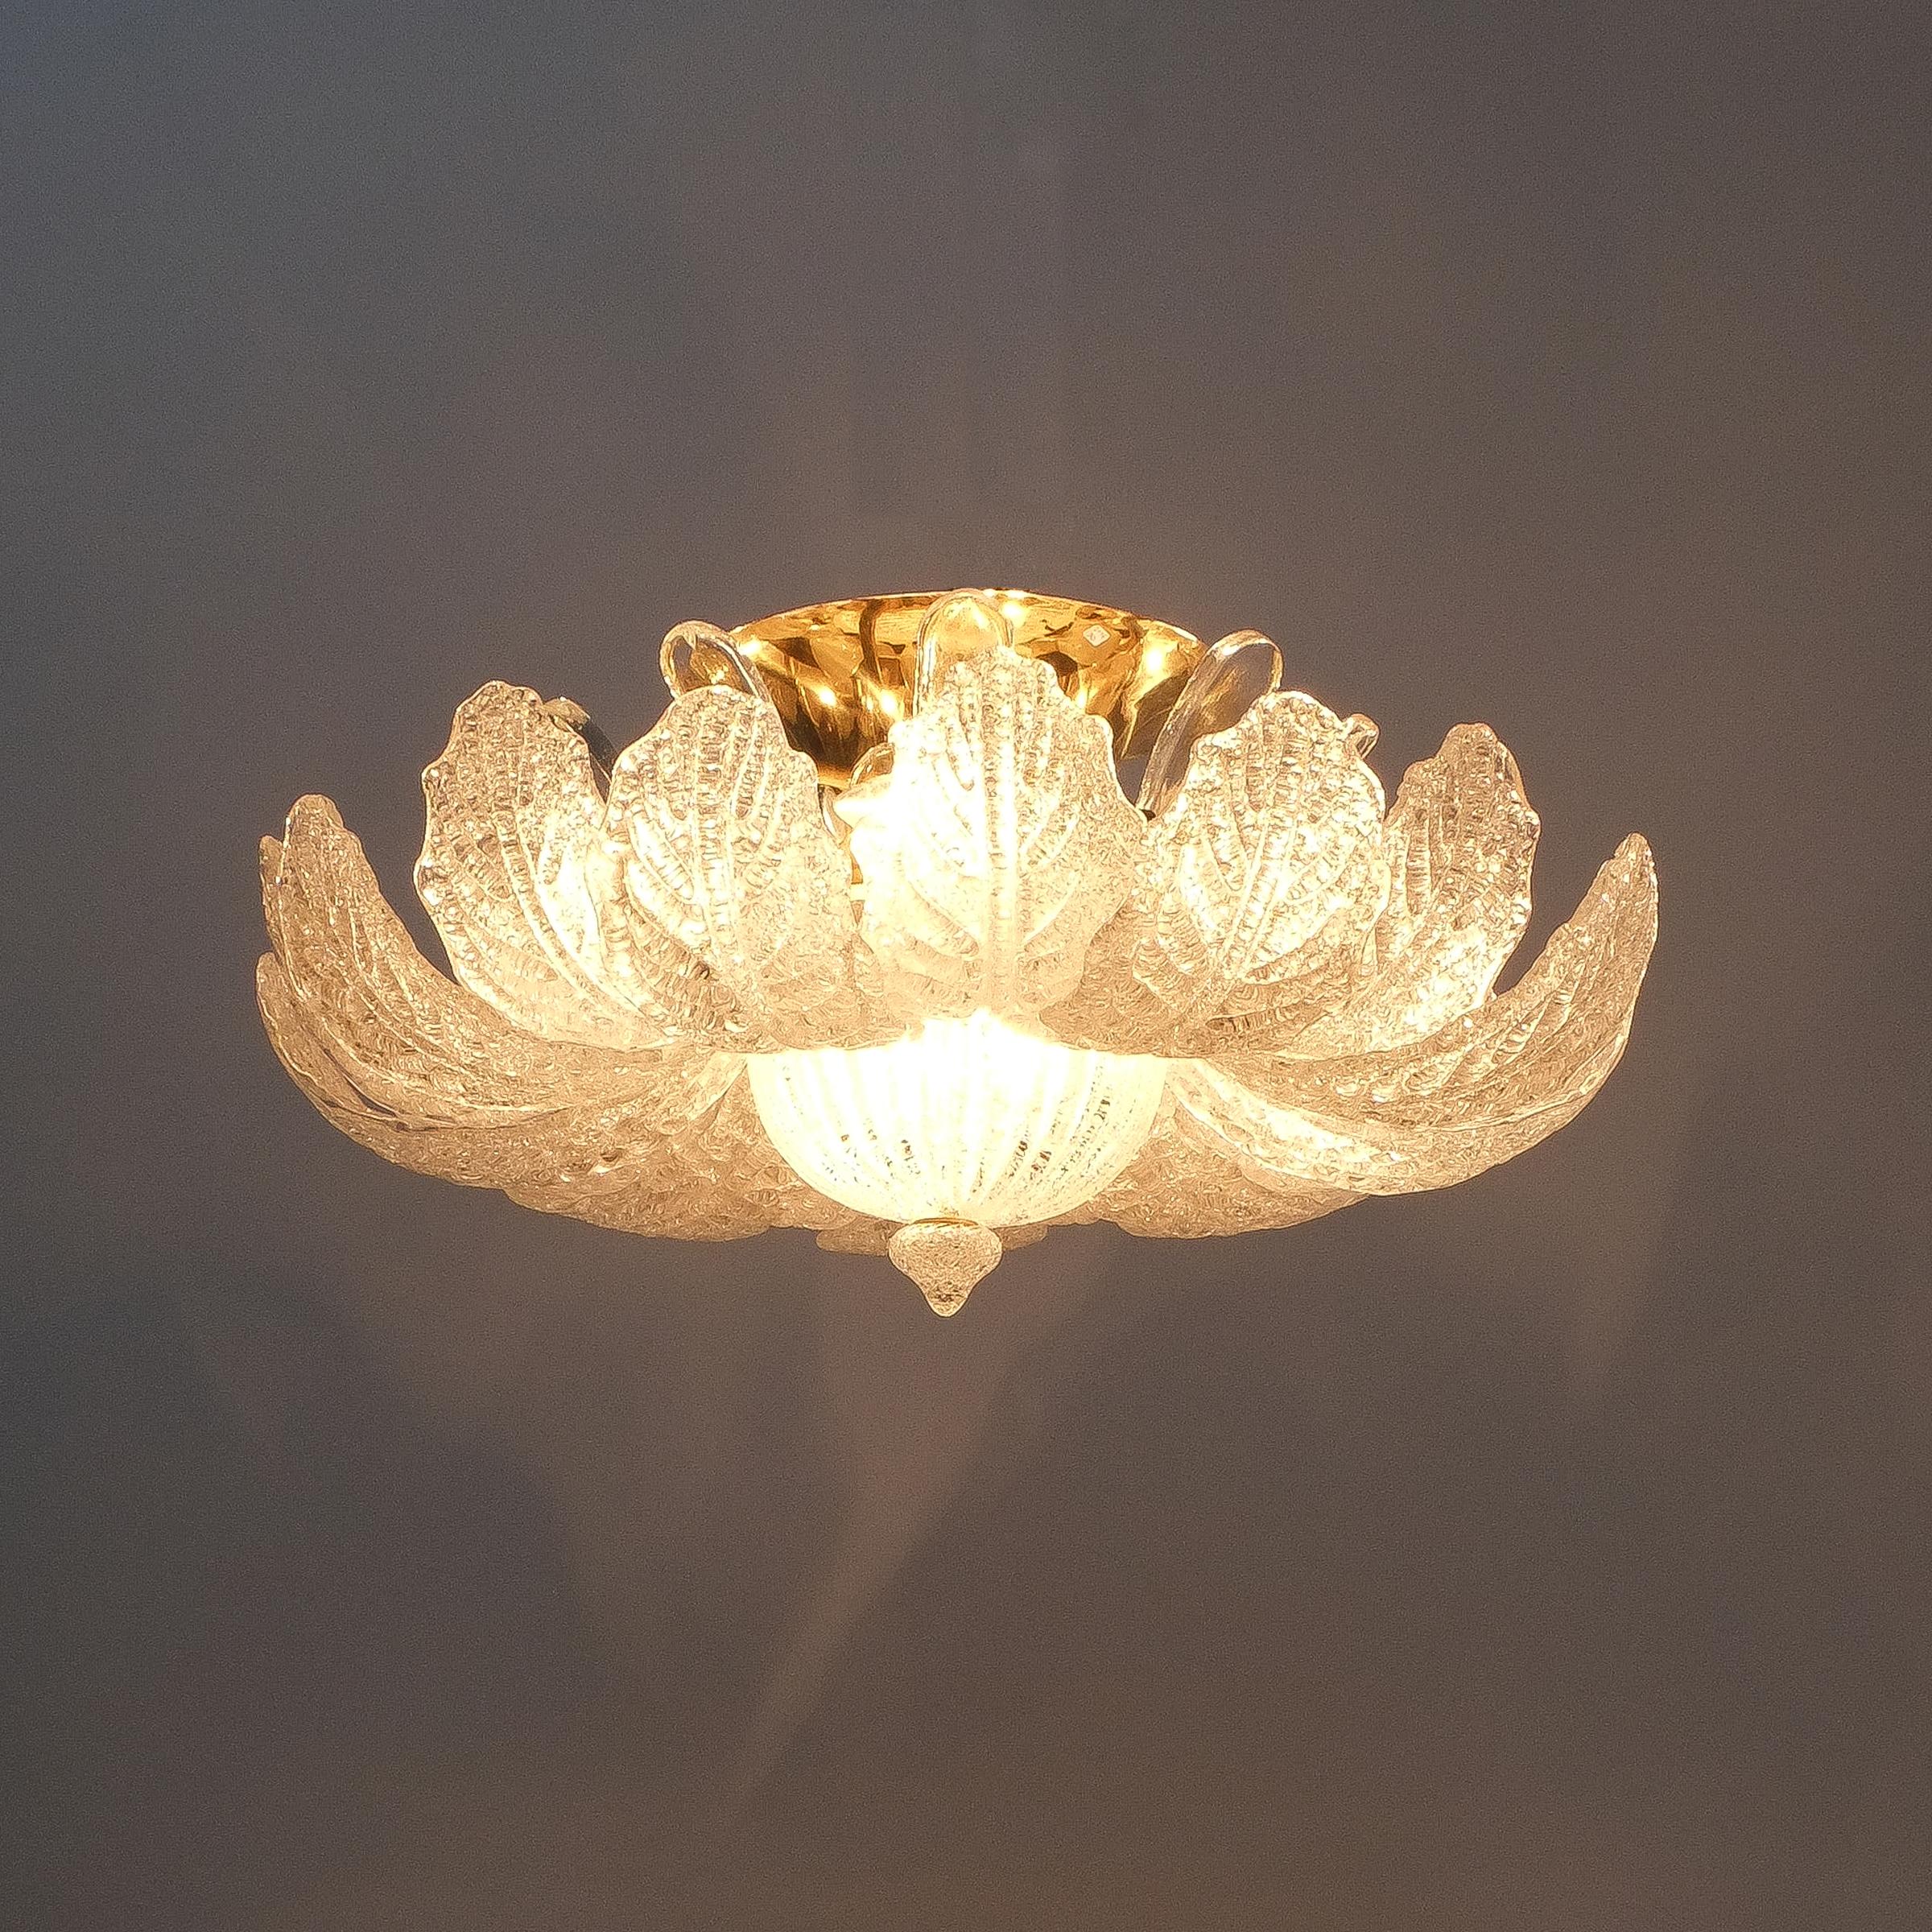 Great Barovier Toso flush mount or chandelier glass brass, Italy midcentury, circa 1965. Wonderful handmade petal glass pieces circulating around brass hardware. The ceiling light is labelled and equipped with 11 bulb sockets (e14 max 40W). Diameter